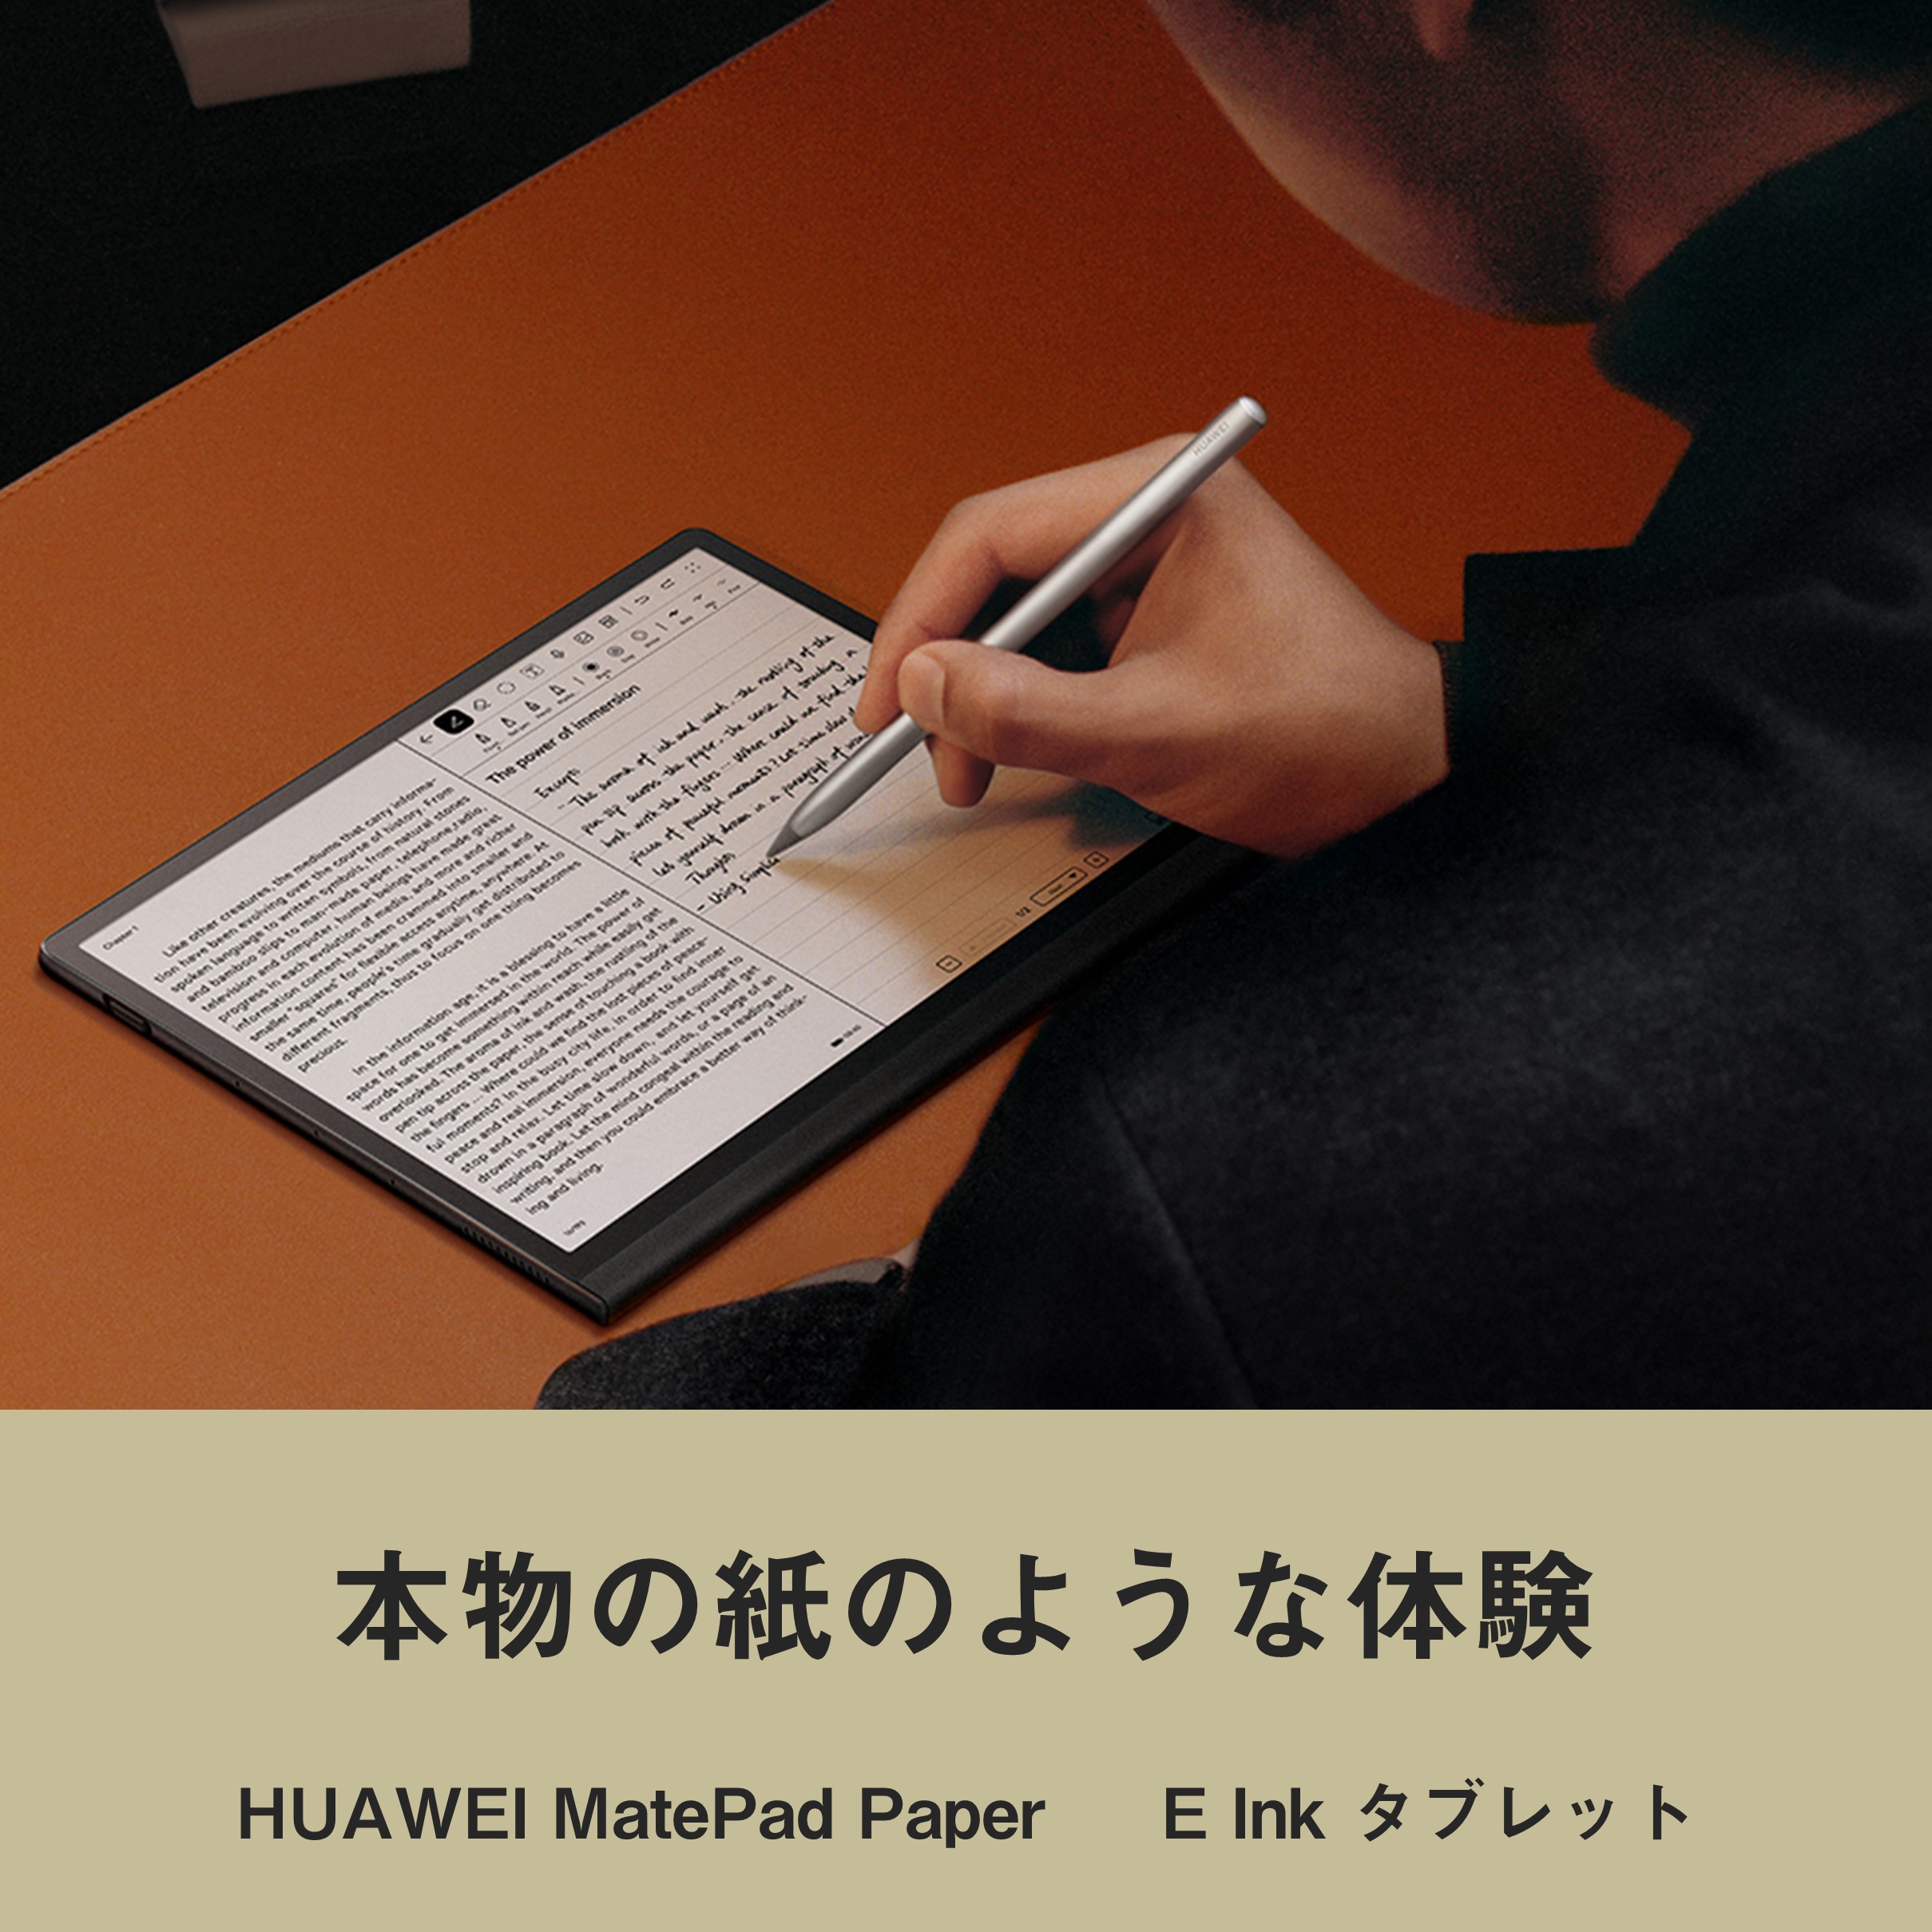 HUAWEI MatePad Paper / E Ink タブレット